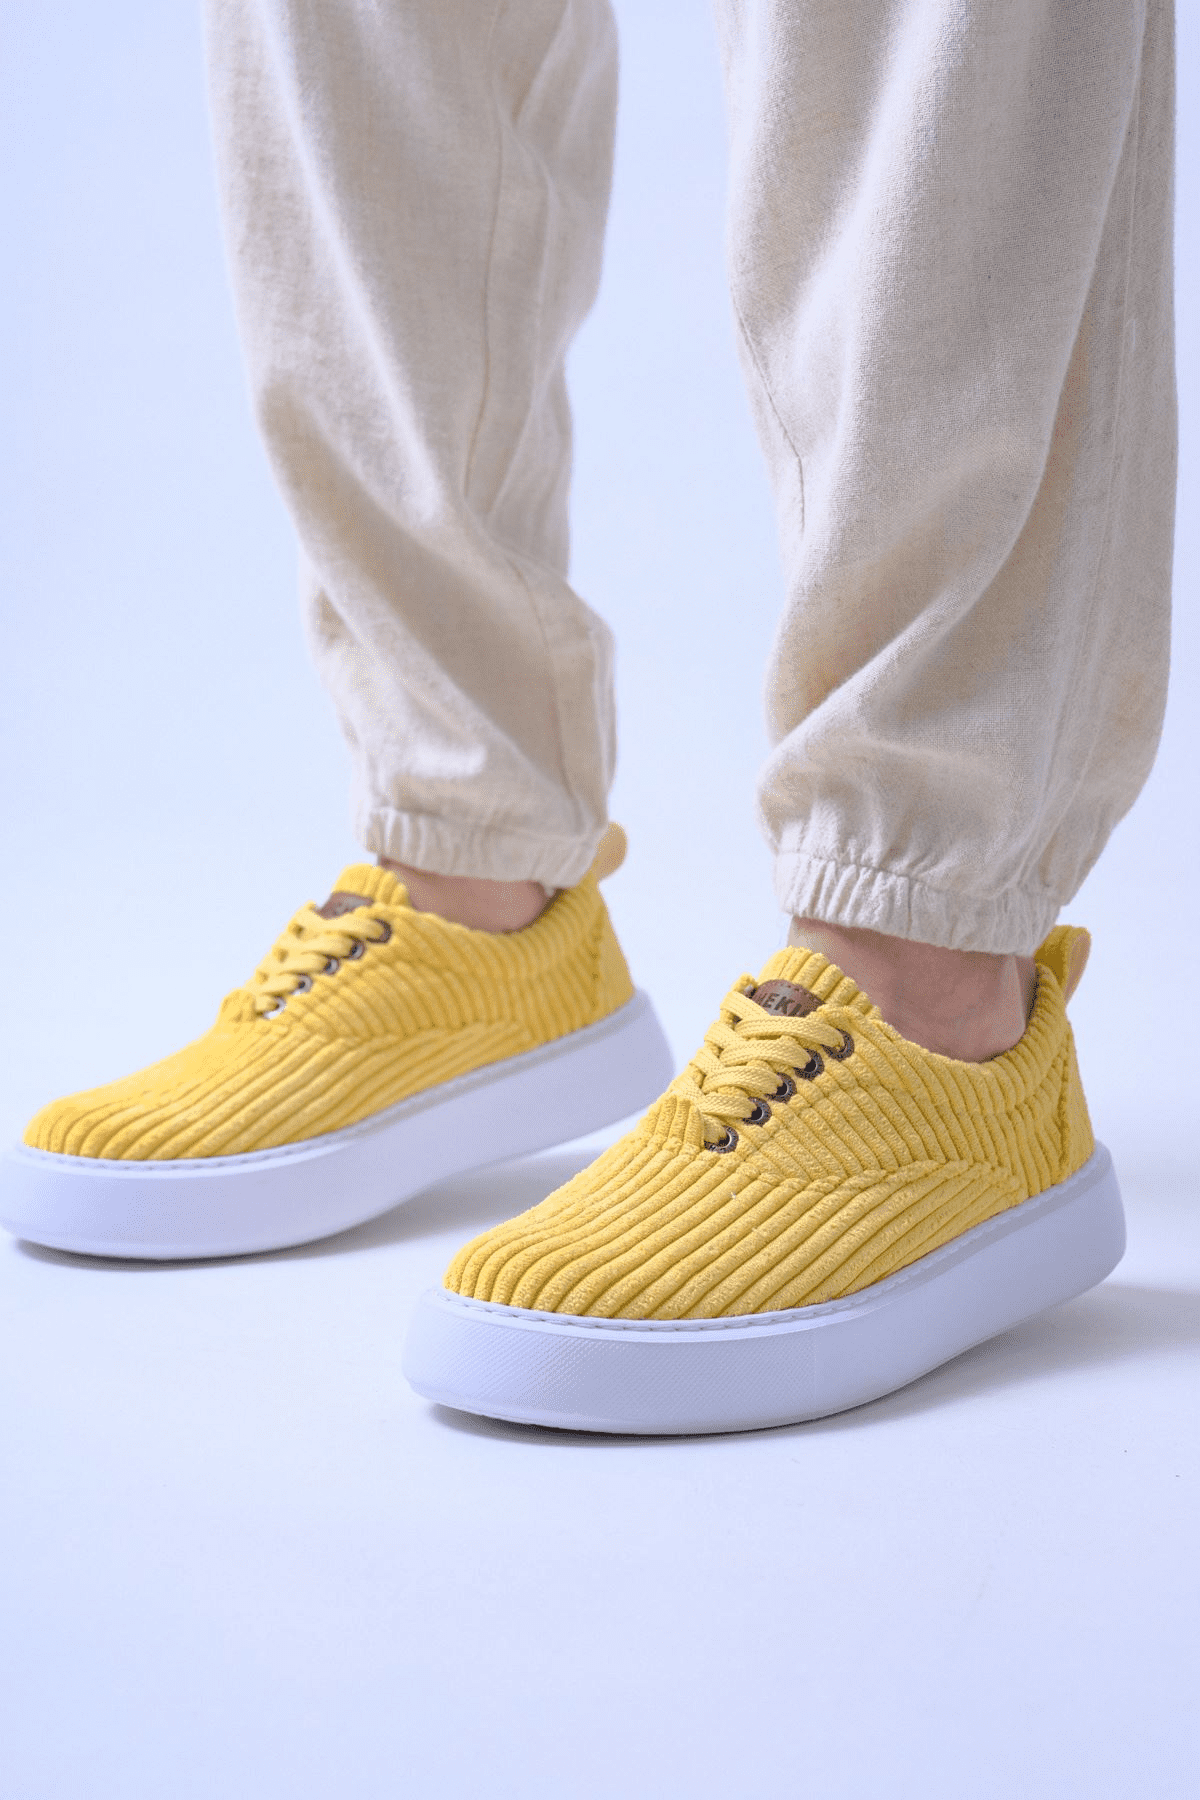 Chekich Men's Shoes Khaki Color Lace-Up Closure Knit Fabric Material Stitched Sole Flexible Lightweight Casual Sneakers CH173 BT